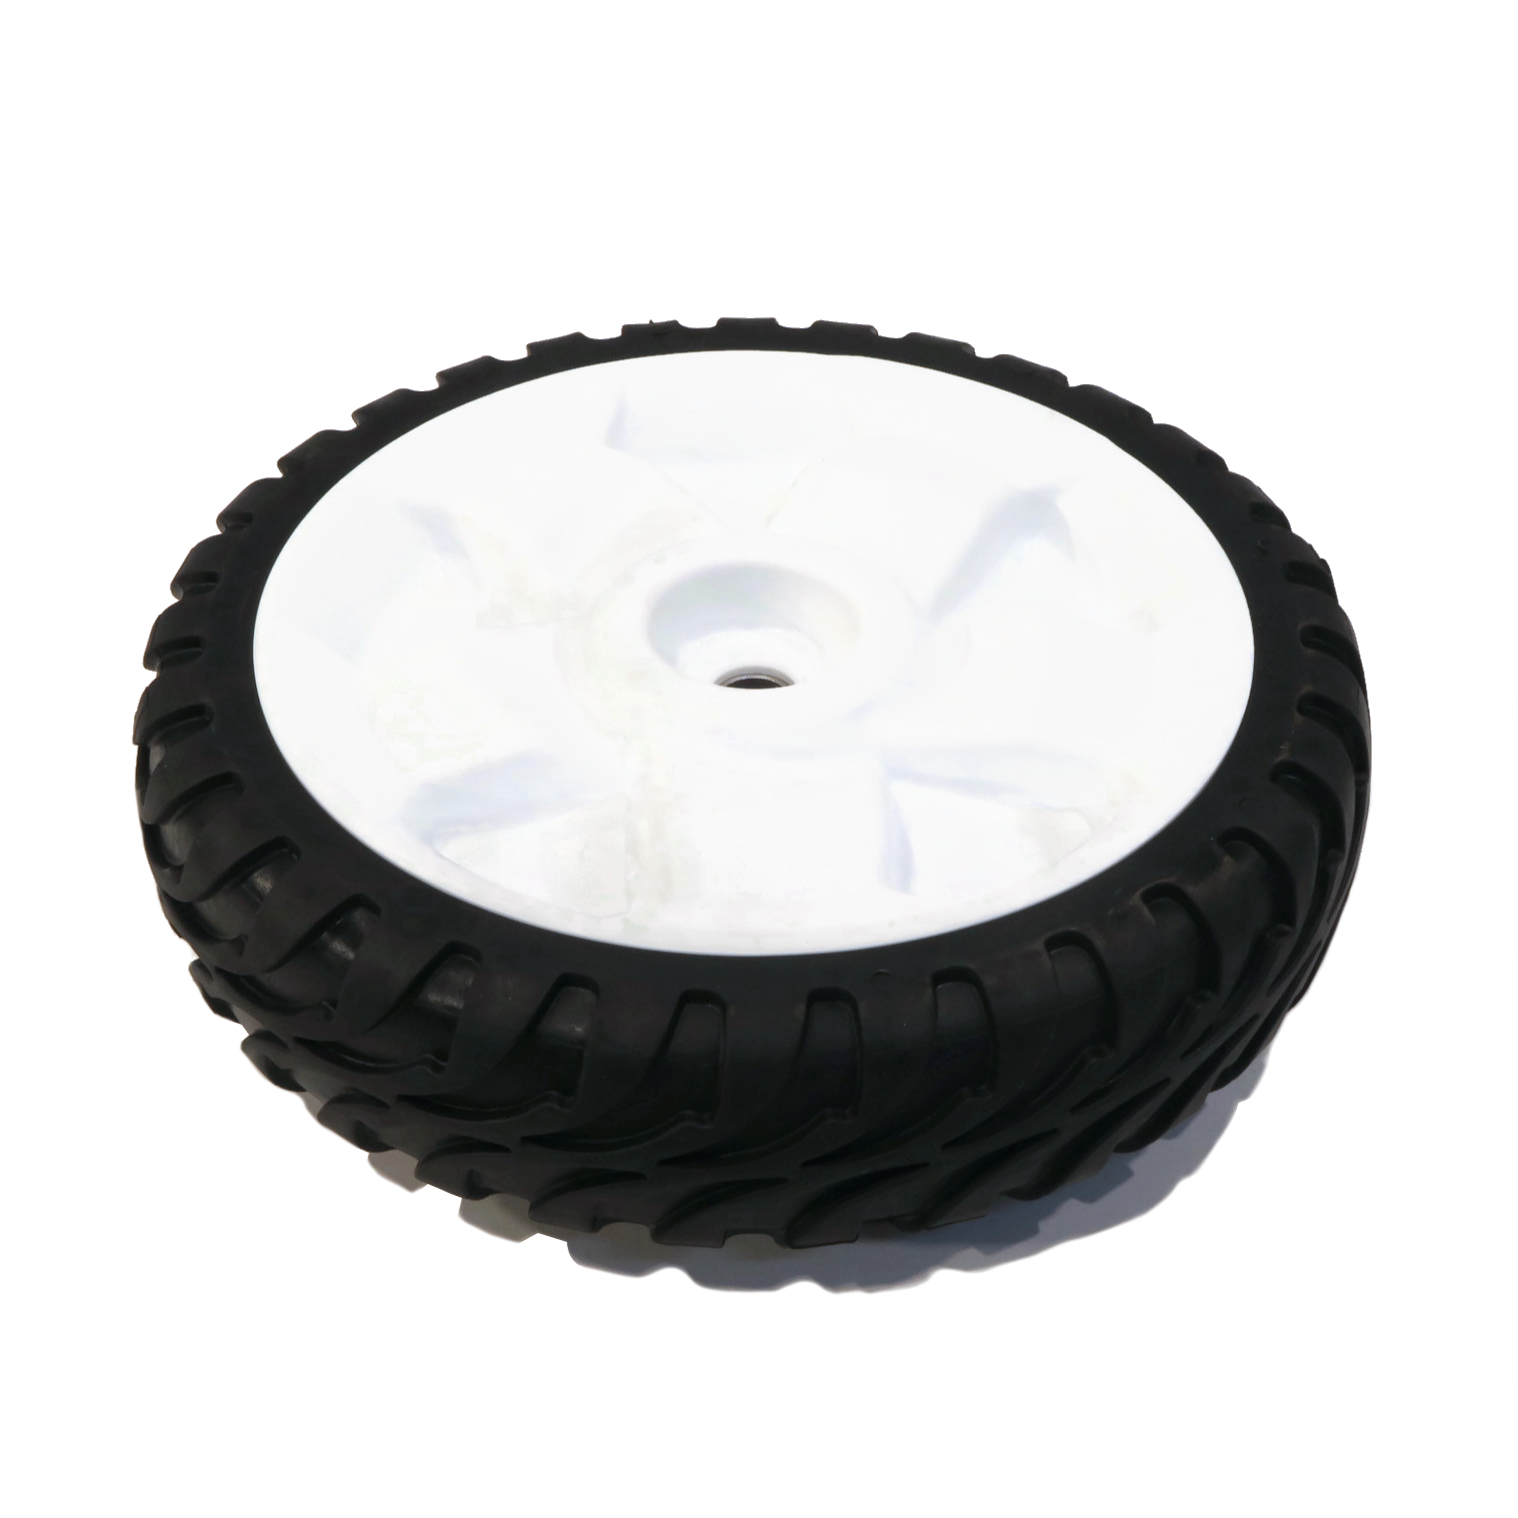 The ROP Shop | TORO OEM 8" Wheel Gear Assembly 138-3216 For RWD Push LawnMower Lawn Mower - image 1 of 7